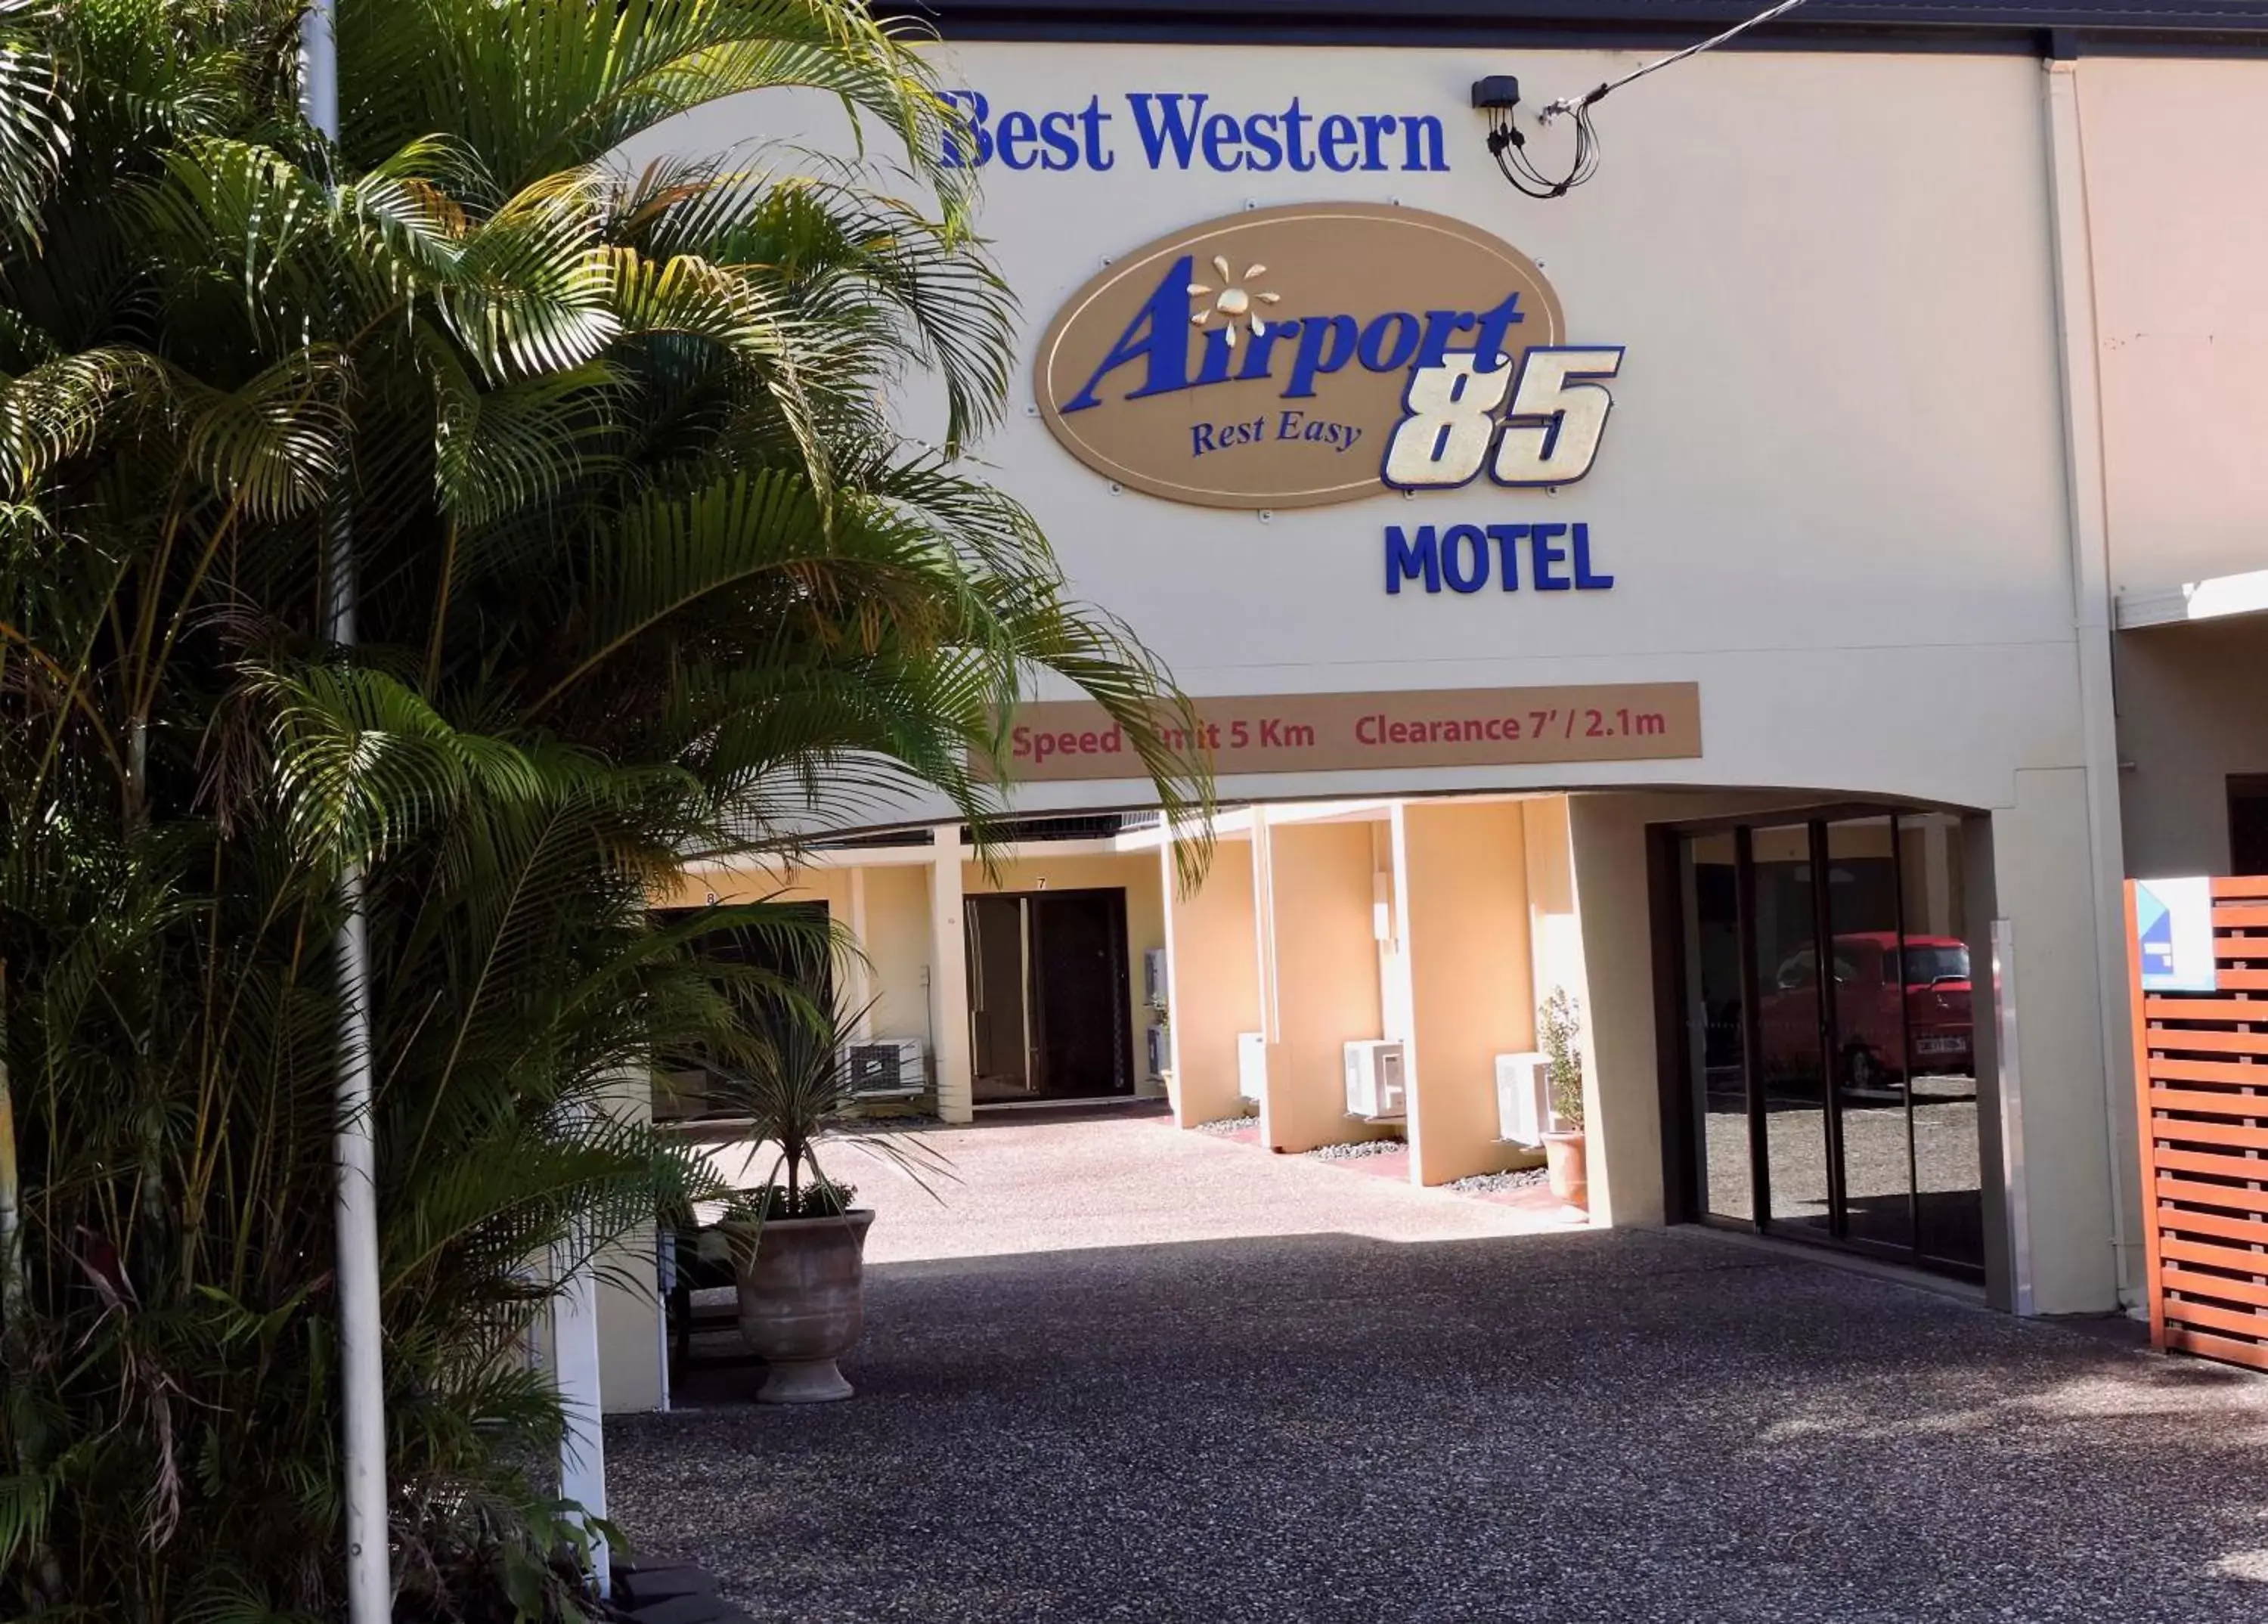 Facade/entrance in Best Western Airport 85 Motel